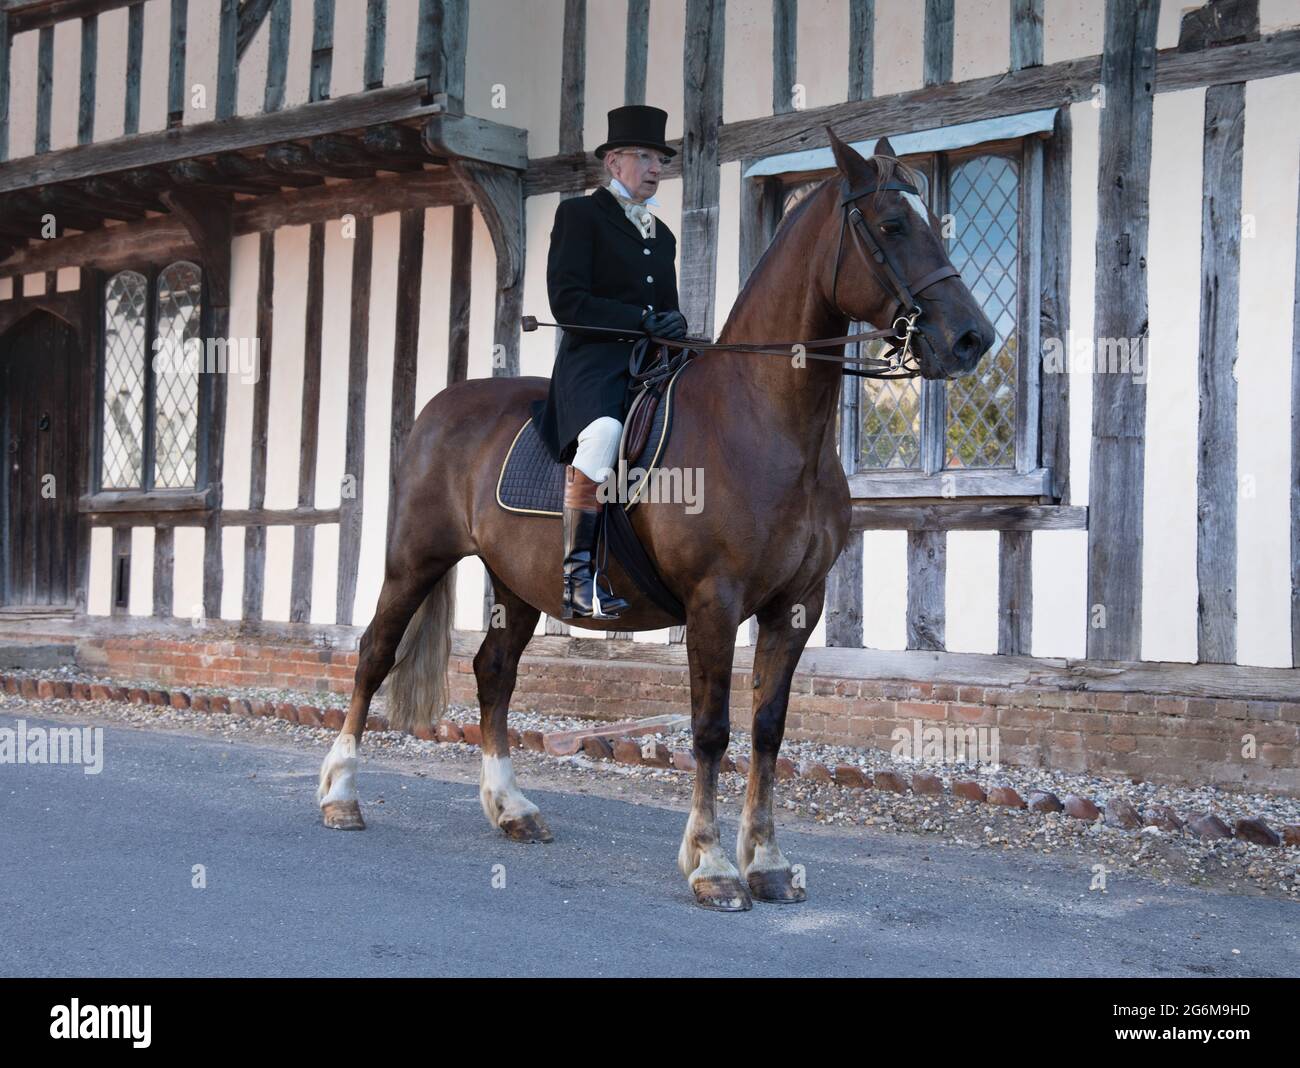 Lady formal riding habit riding a bay hunter horse in a pretty Suffolk village of Nayland in England with a old timbered building in the background Stock Photo